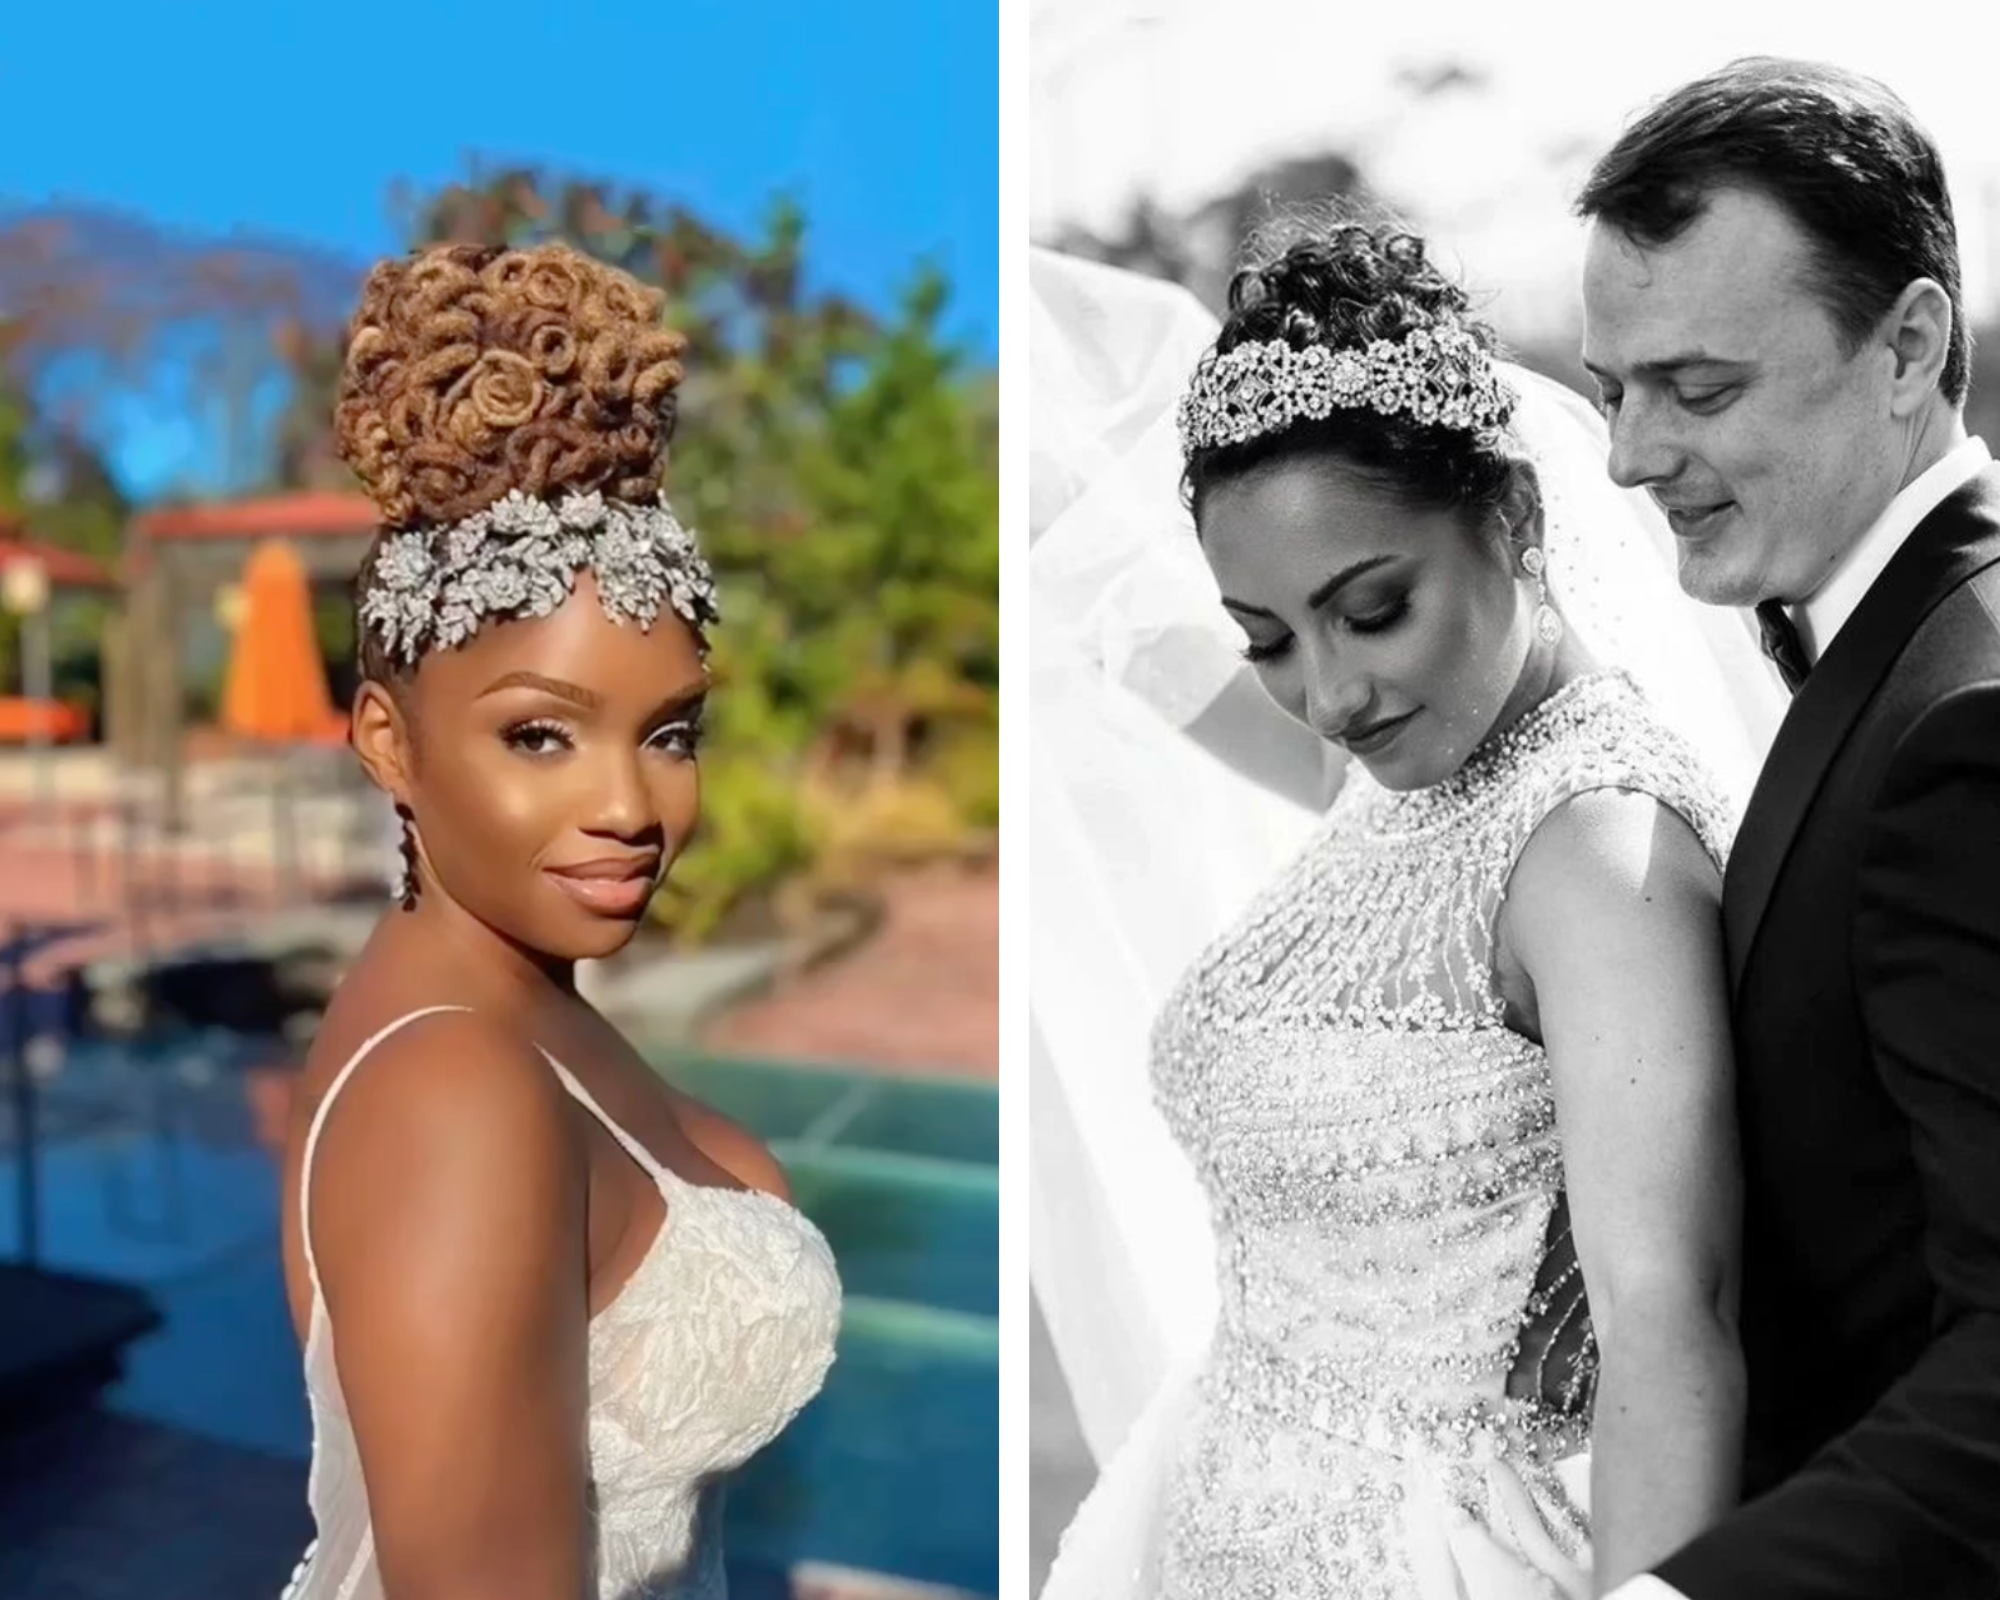 One bride wearing her coils in a timeless updo. The other is wearing her tight curls in a classic updo.